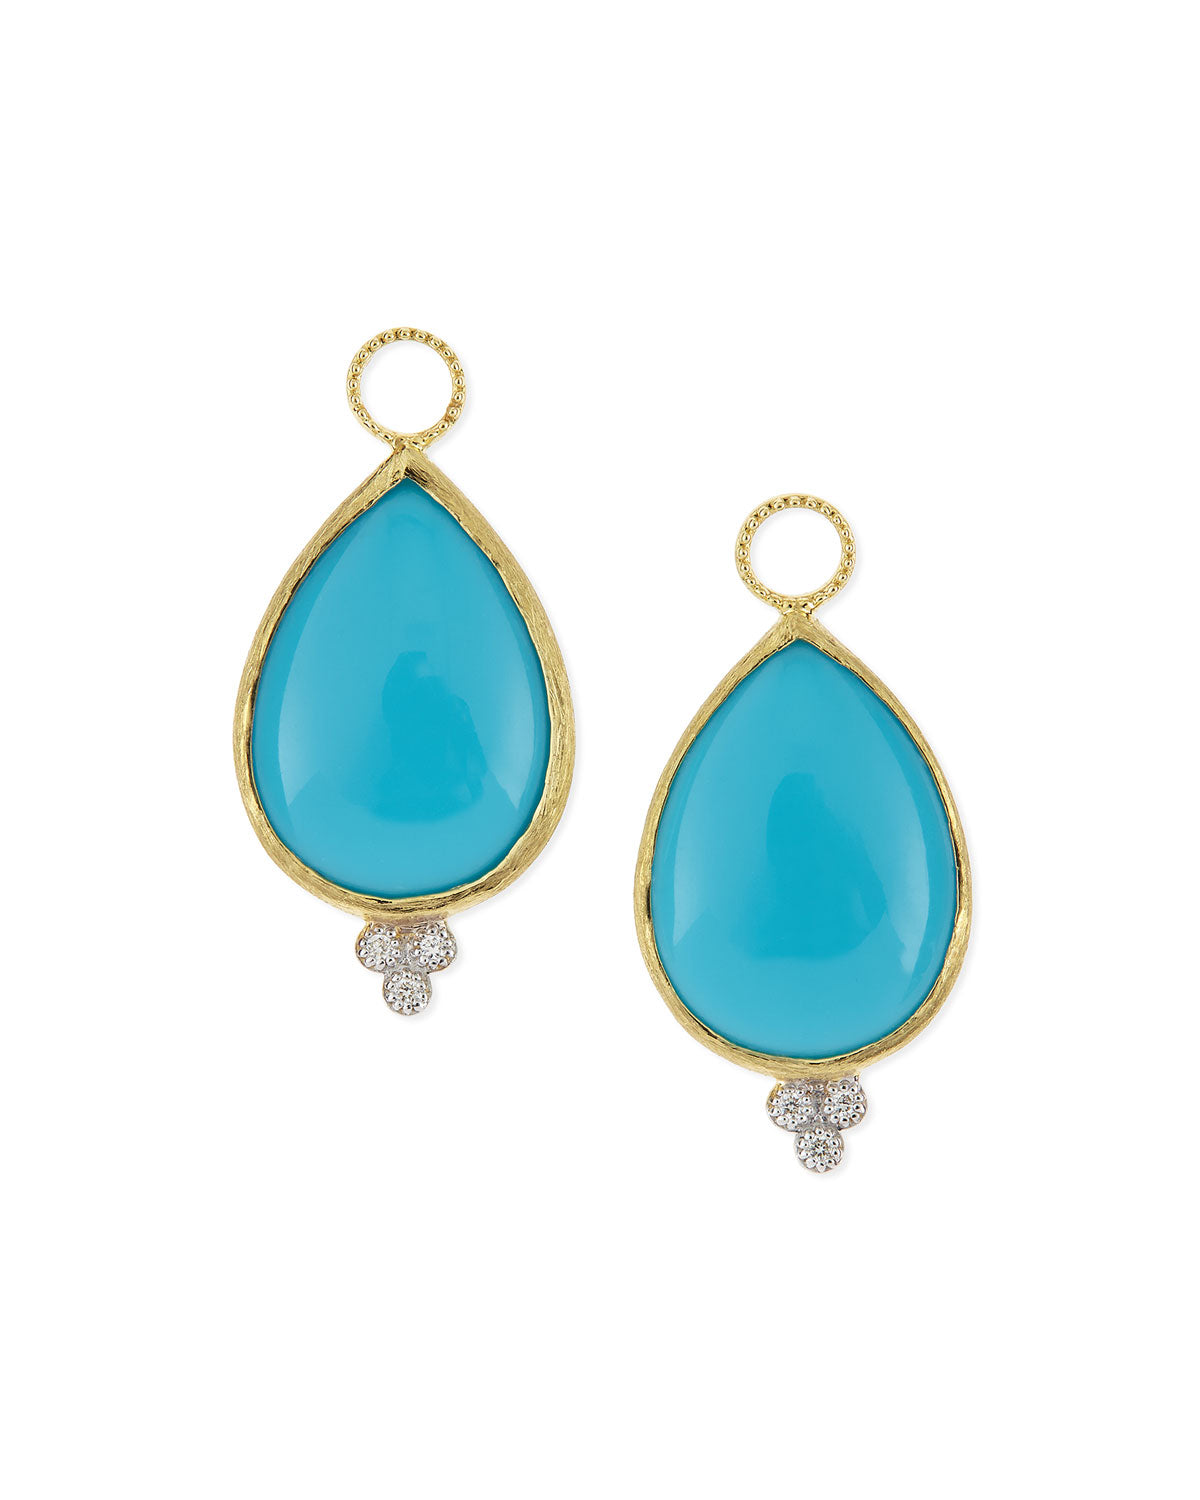 Large Turquoise Pear Earring Charms with Diamond